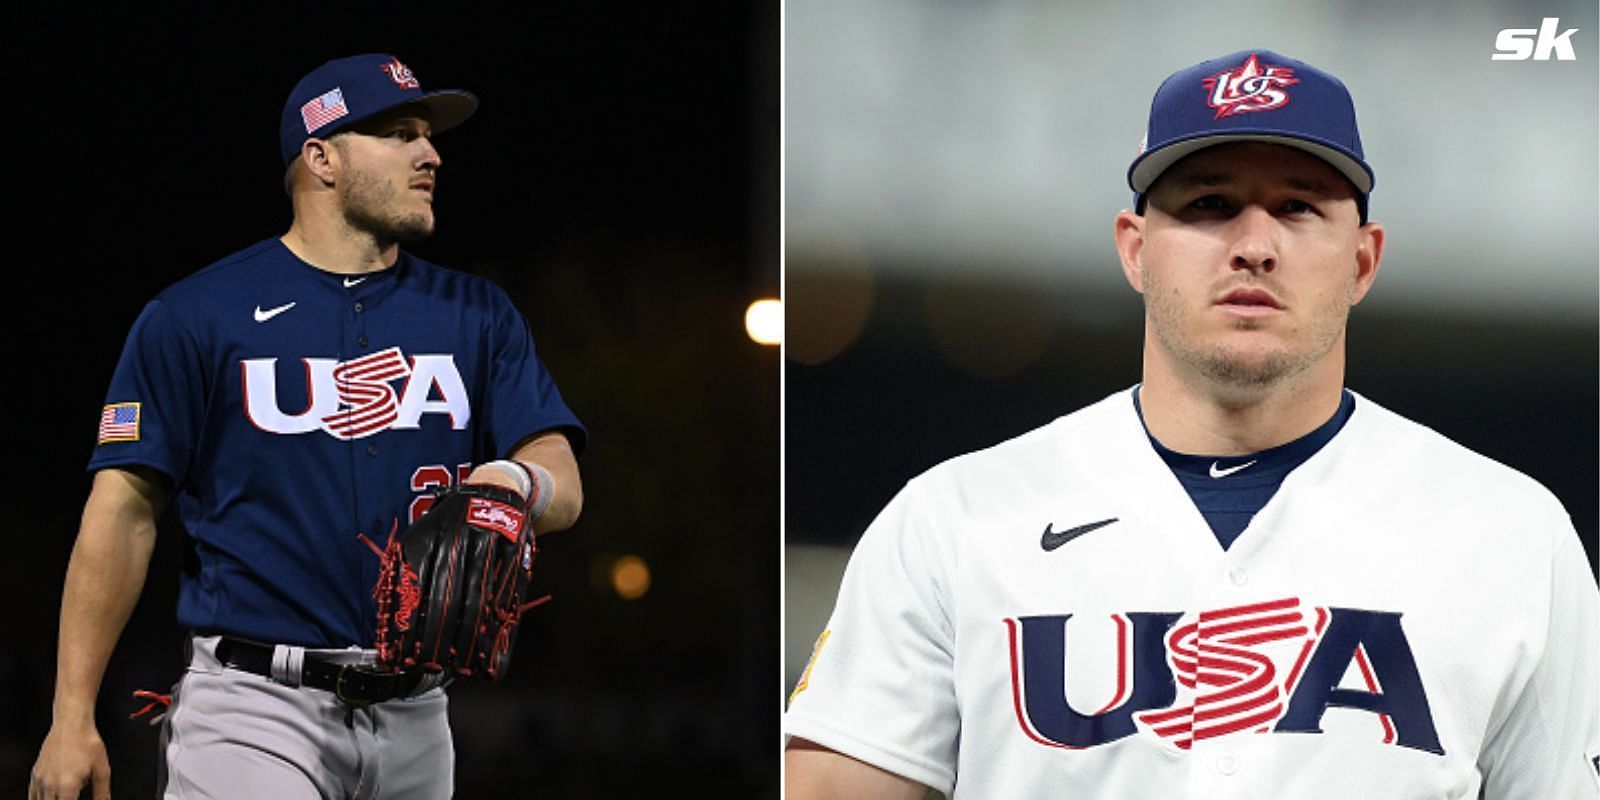 Mike Trout talked about leading Team USA to WBC 2023 finals